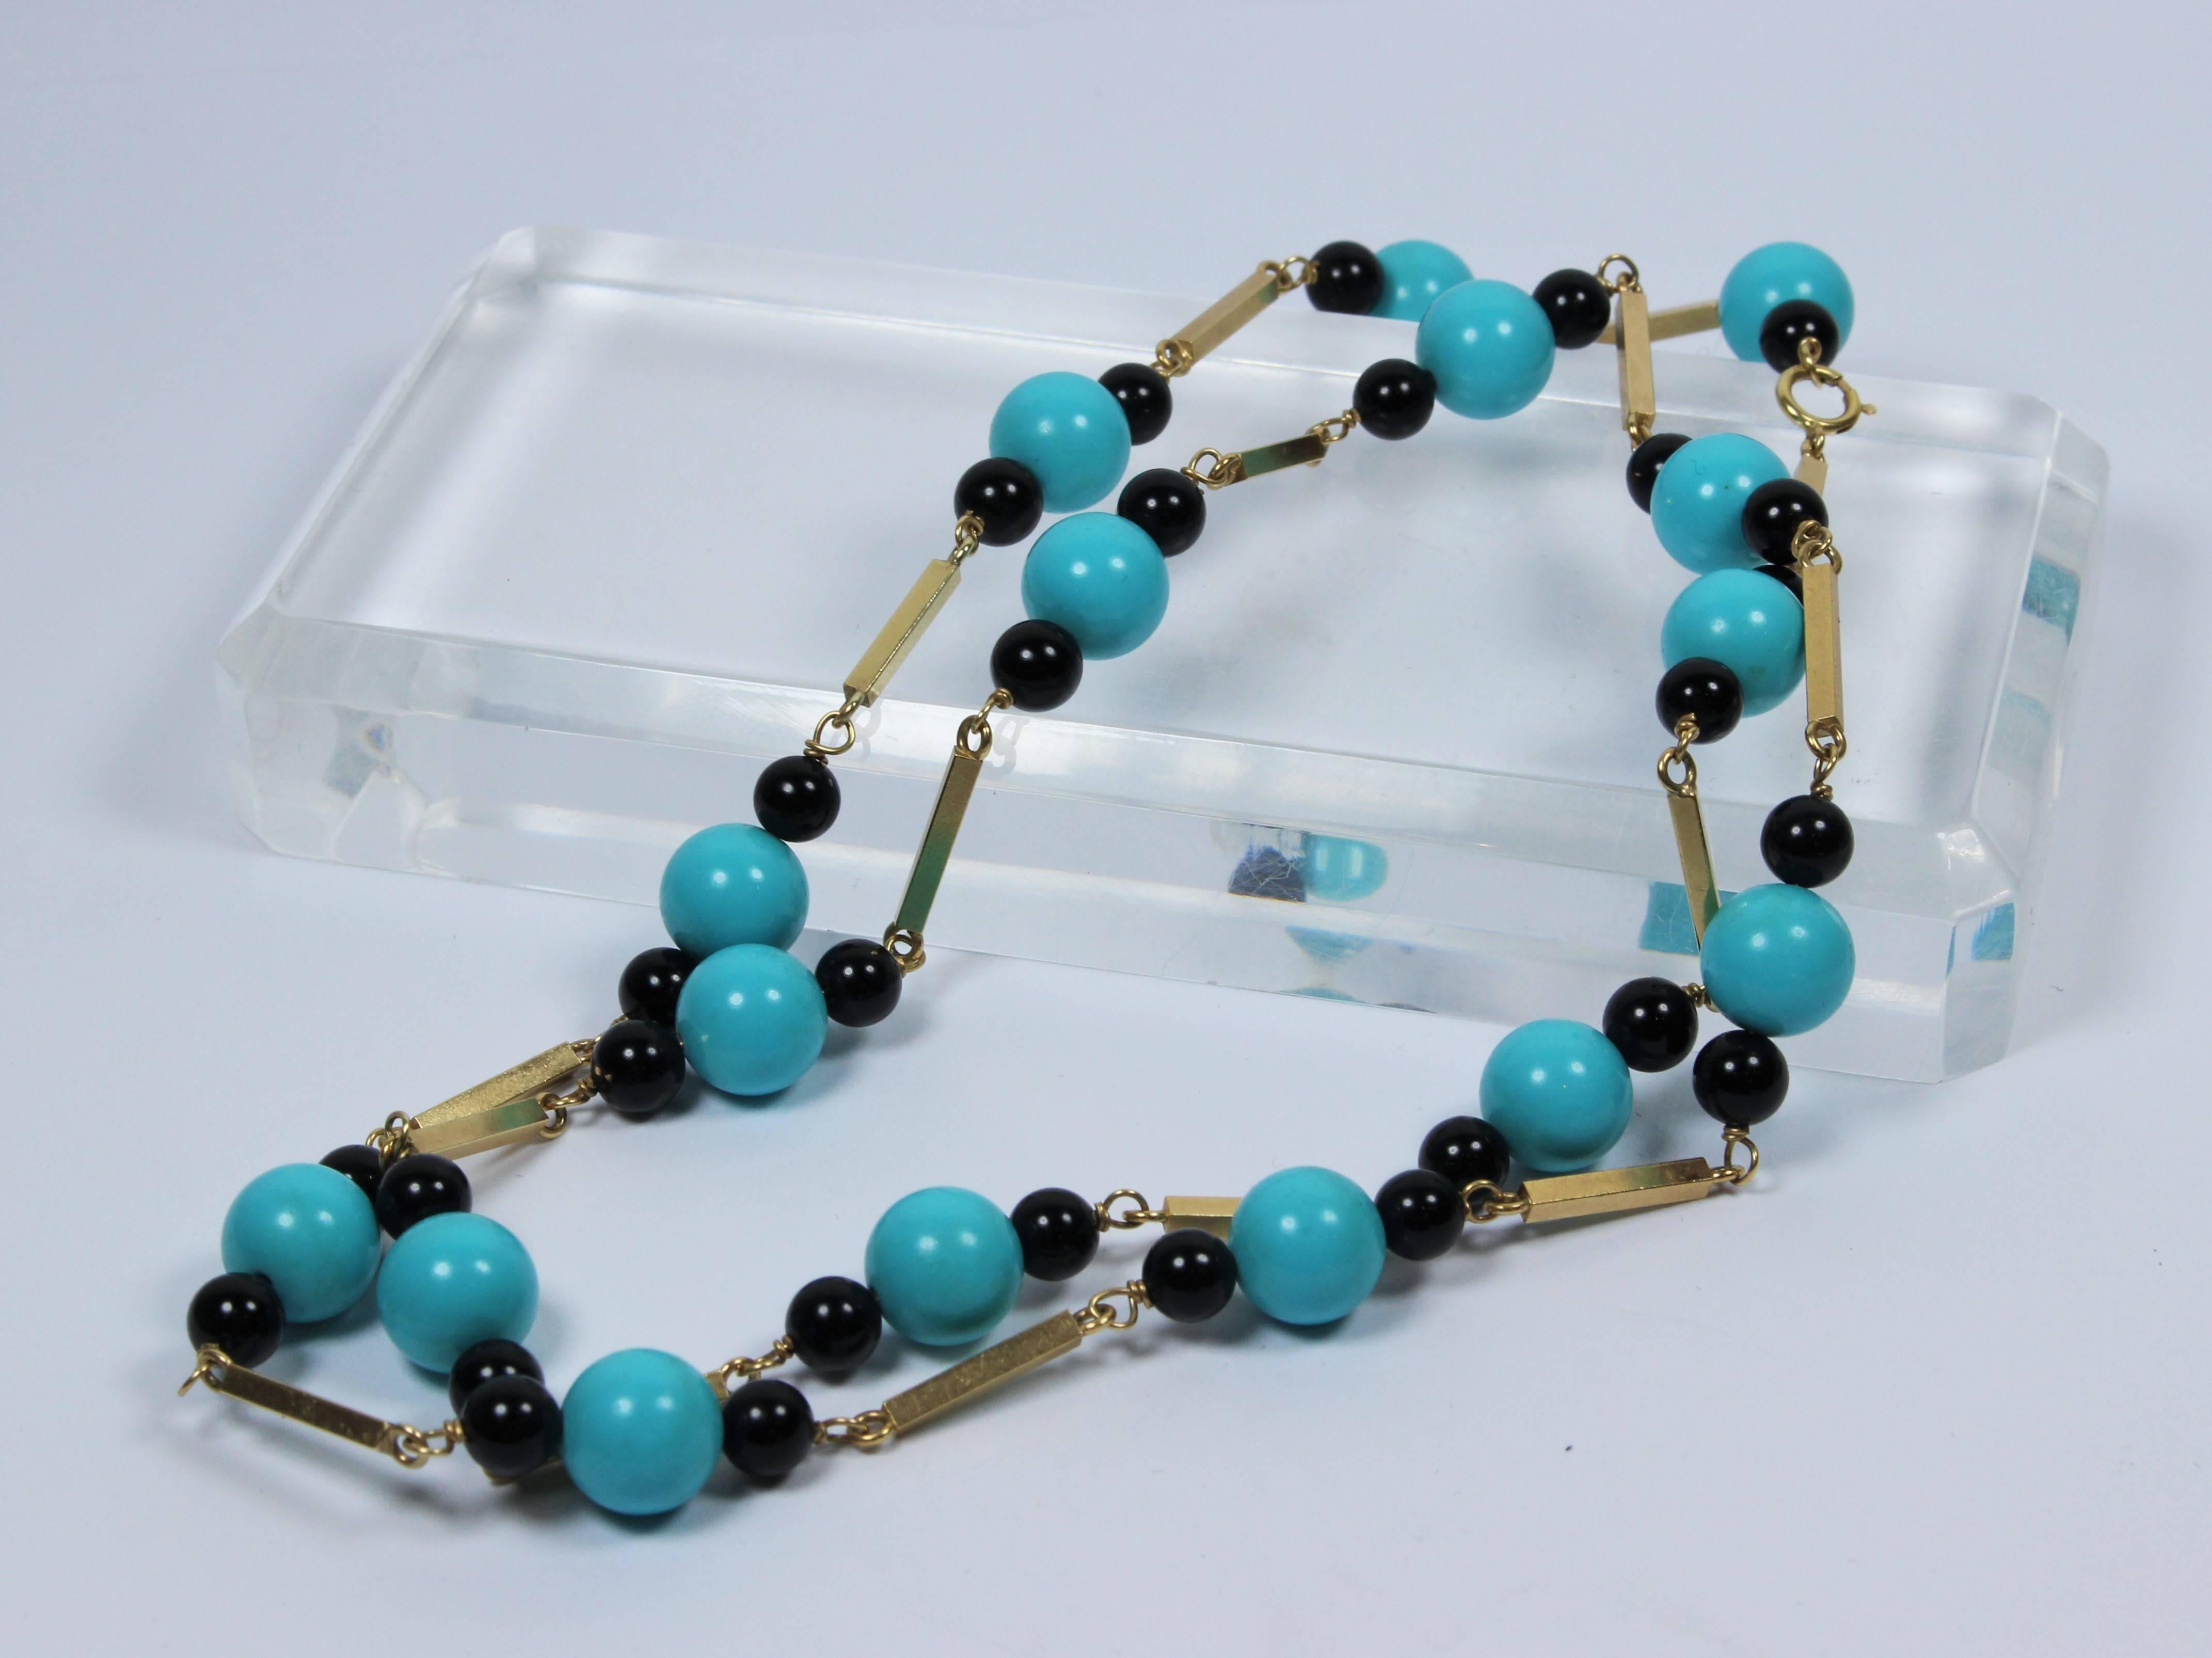 This vintage necklace is composed of 14KT yellow gold with onyx and turquoise. Can be worn doubled or single strand, features a clasp closure. In excellent vintage condition.

Specs: 
14KT Yellow Gold, Onyx, Turquoise  
Length: 27